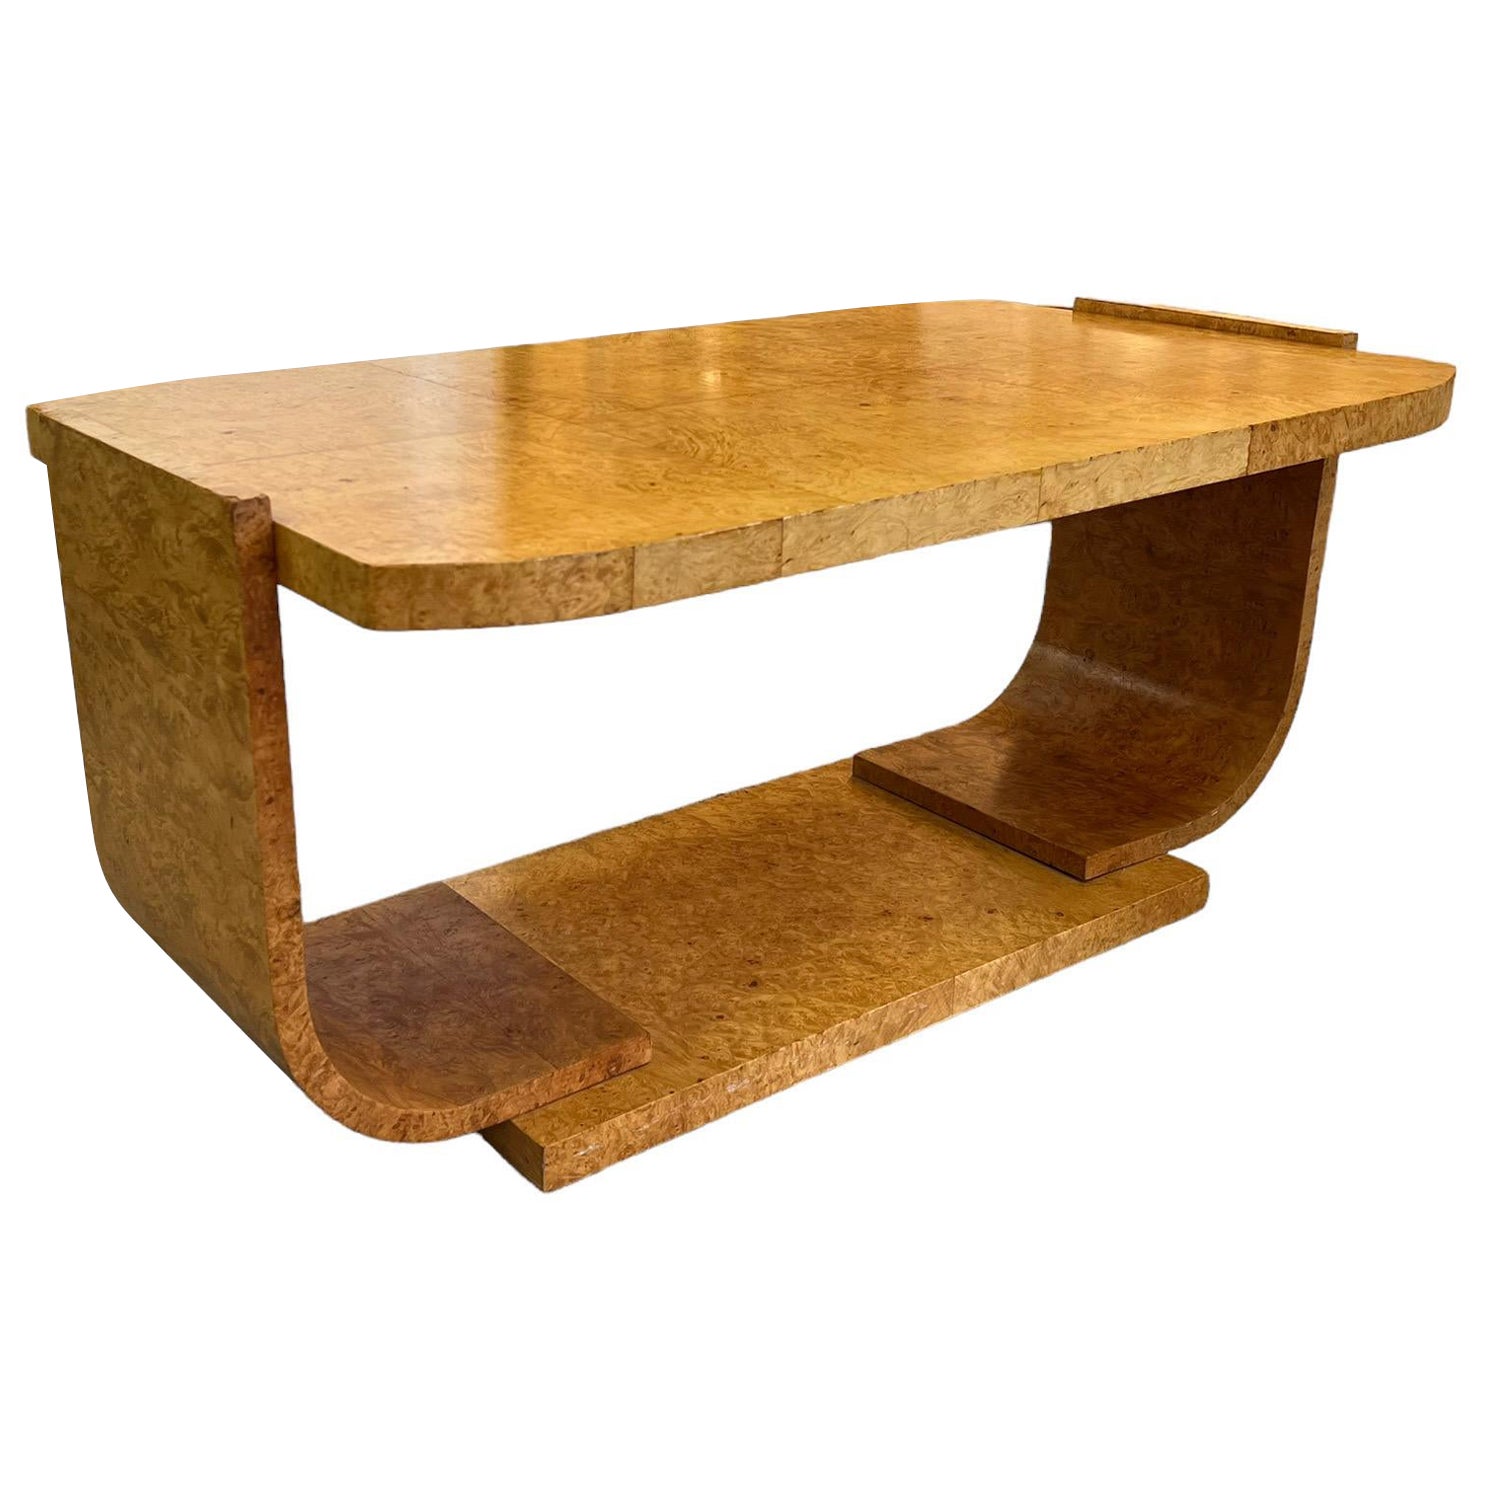 A beautiful and extremely well made original Art Deco period coffee table  For Sale